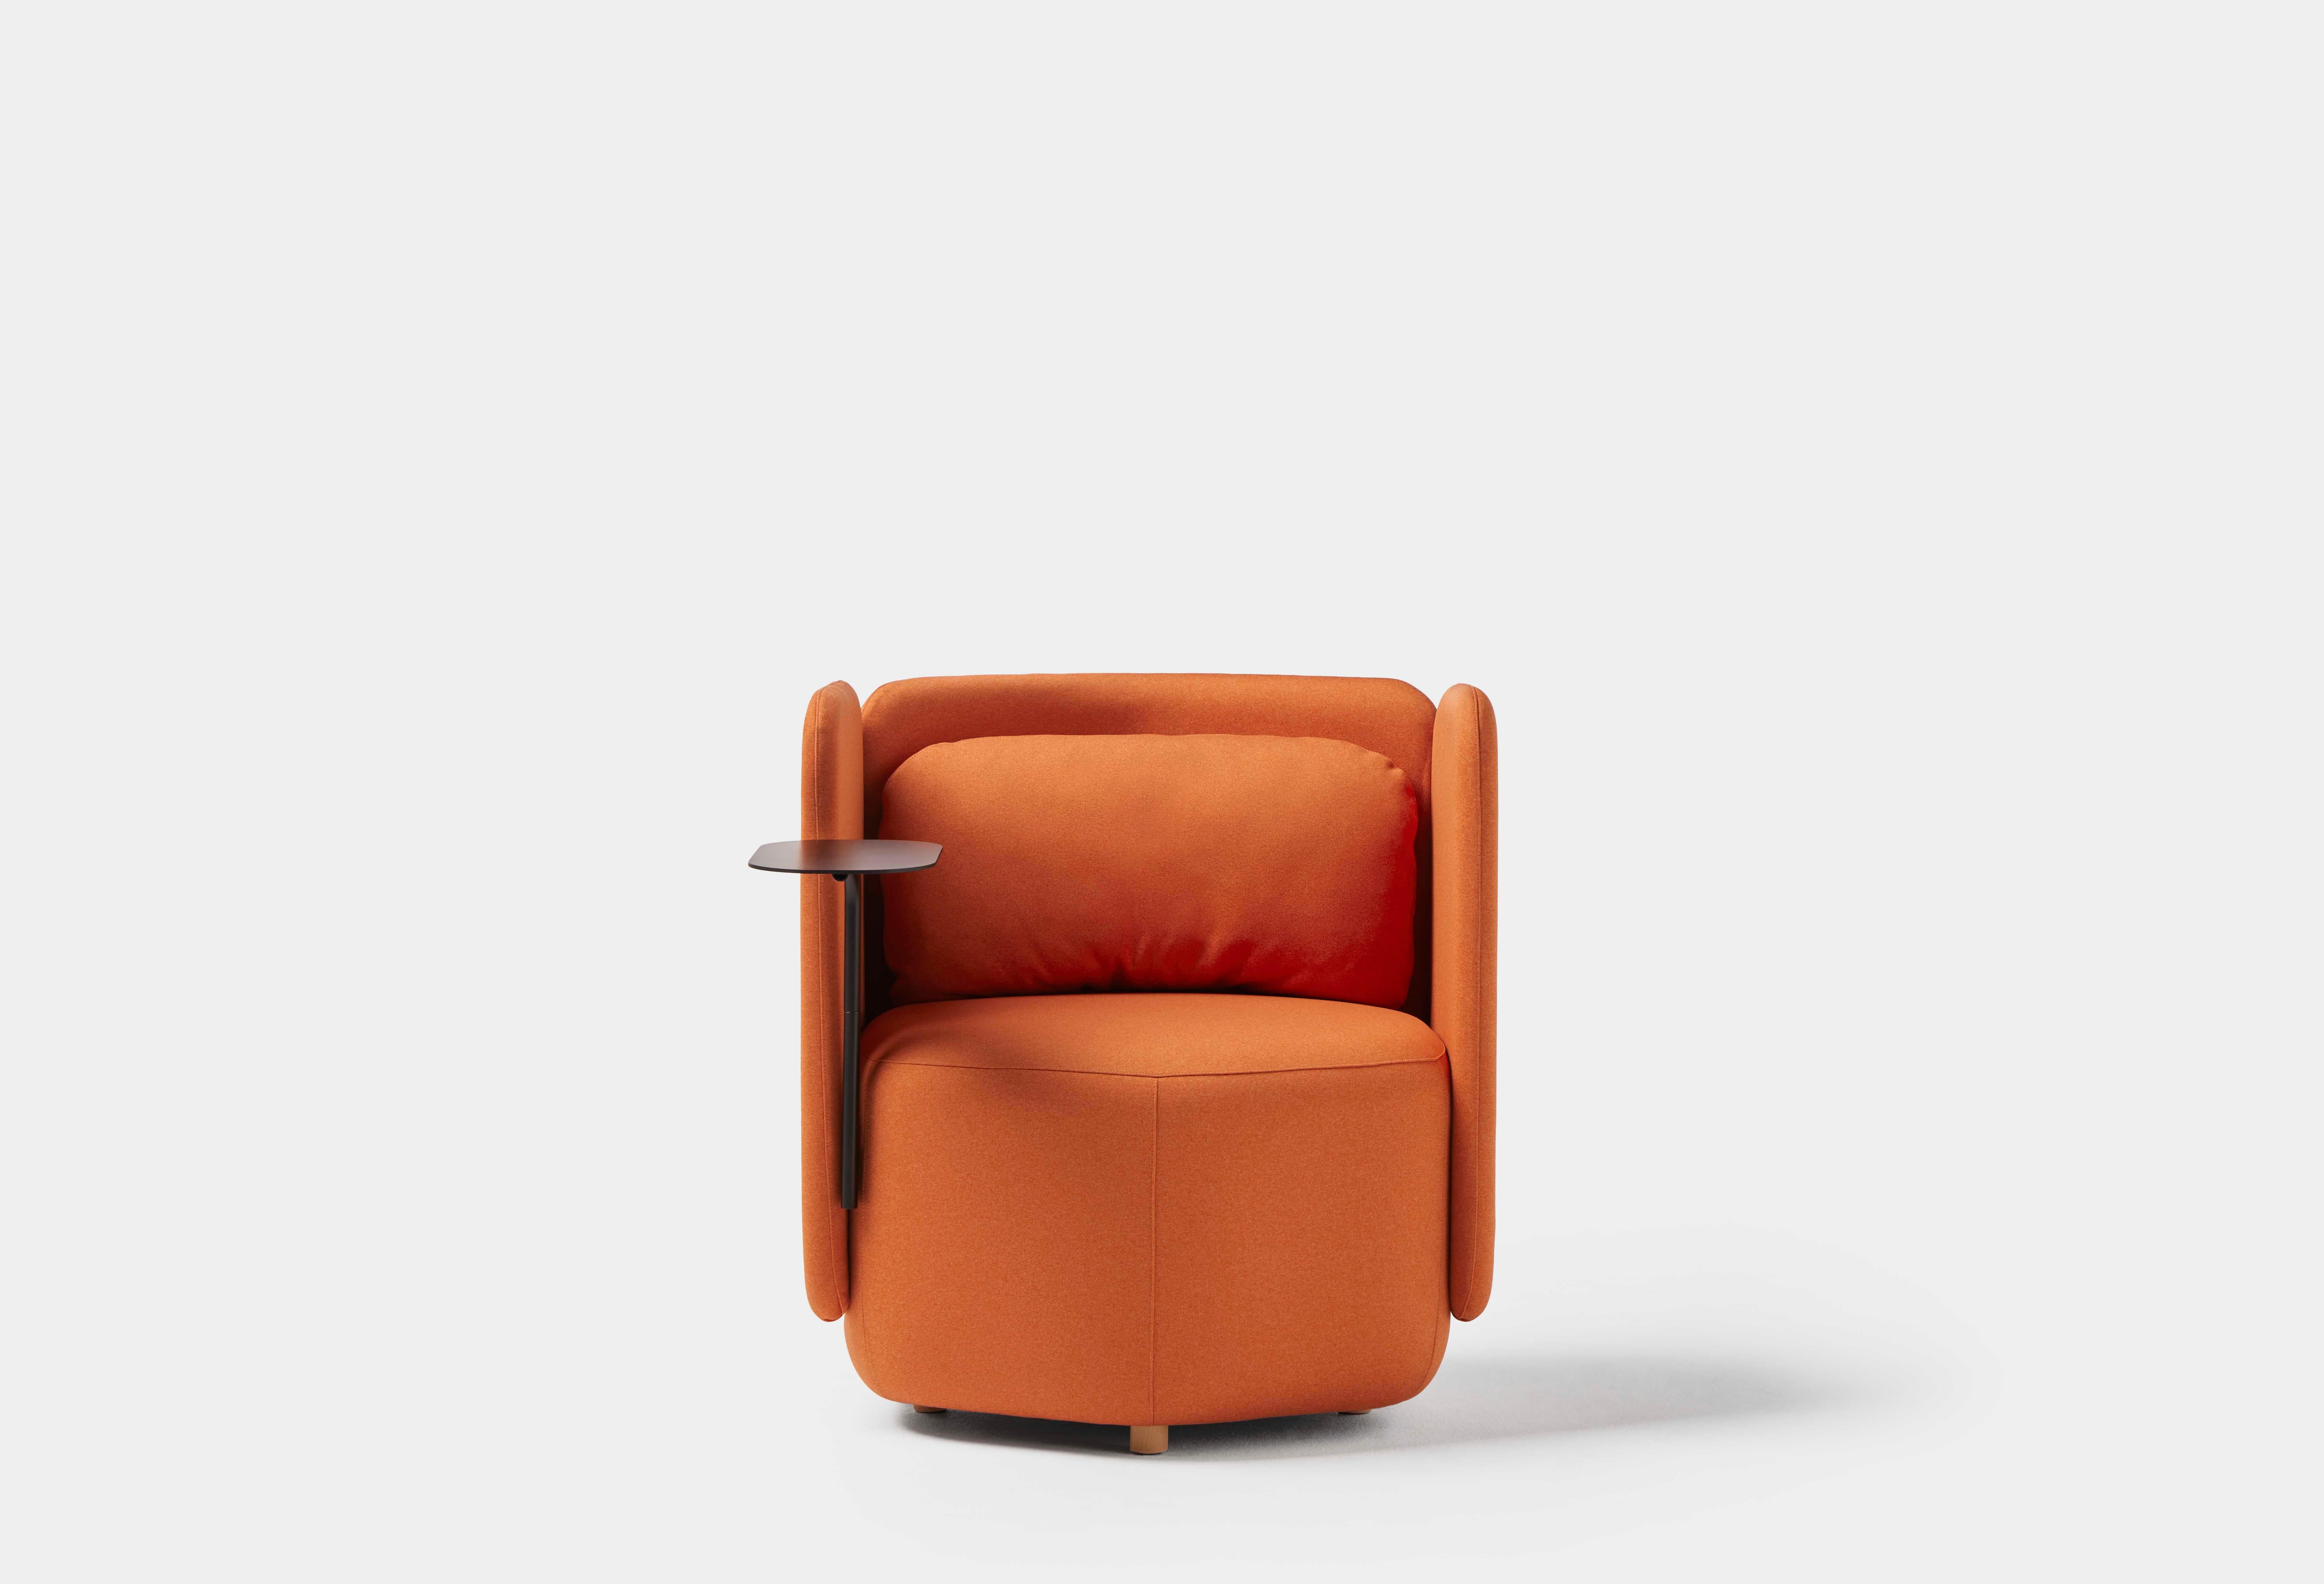 HEX Armchair low panels with side table by Pepe Albargues.
Dimensions: W 76 x D 77 x H 80 x seat 44
Materials: Pine wood and tablex seat structure. Backrest with metal frame, plywood and tablex board. Foam CMHR (high resilience and flame